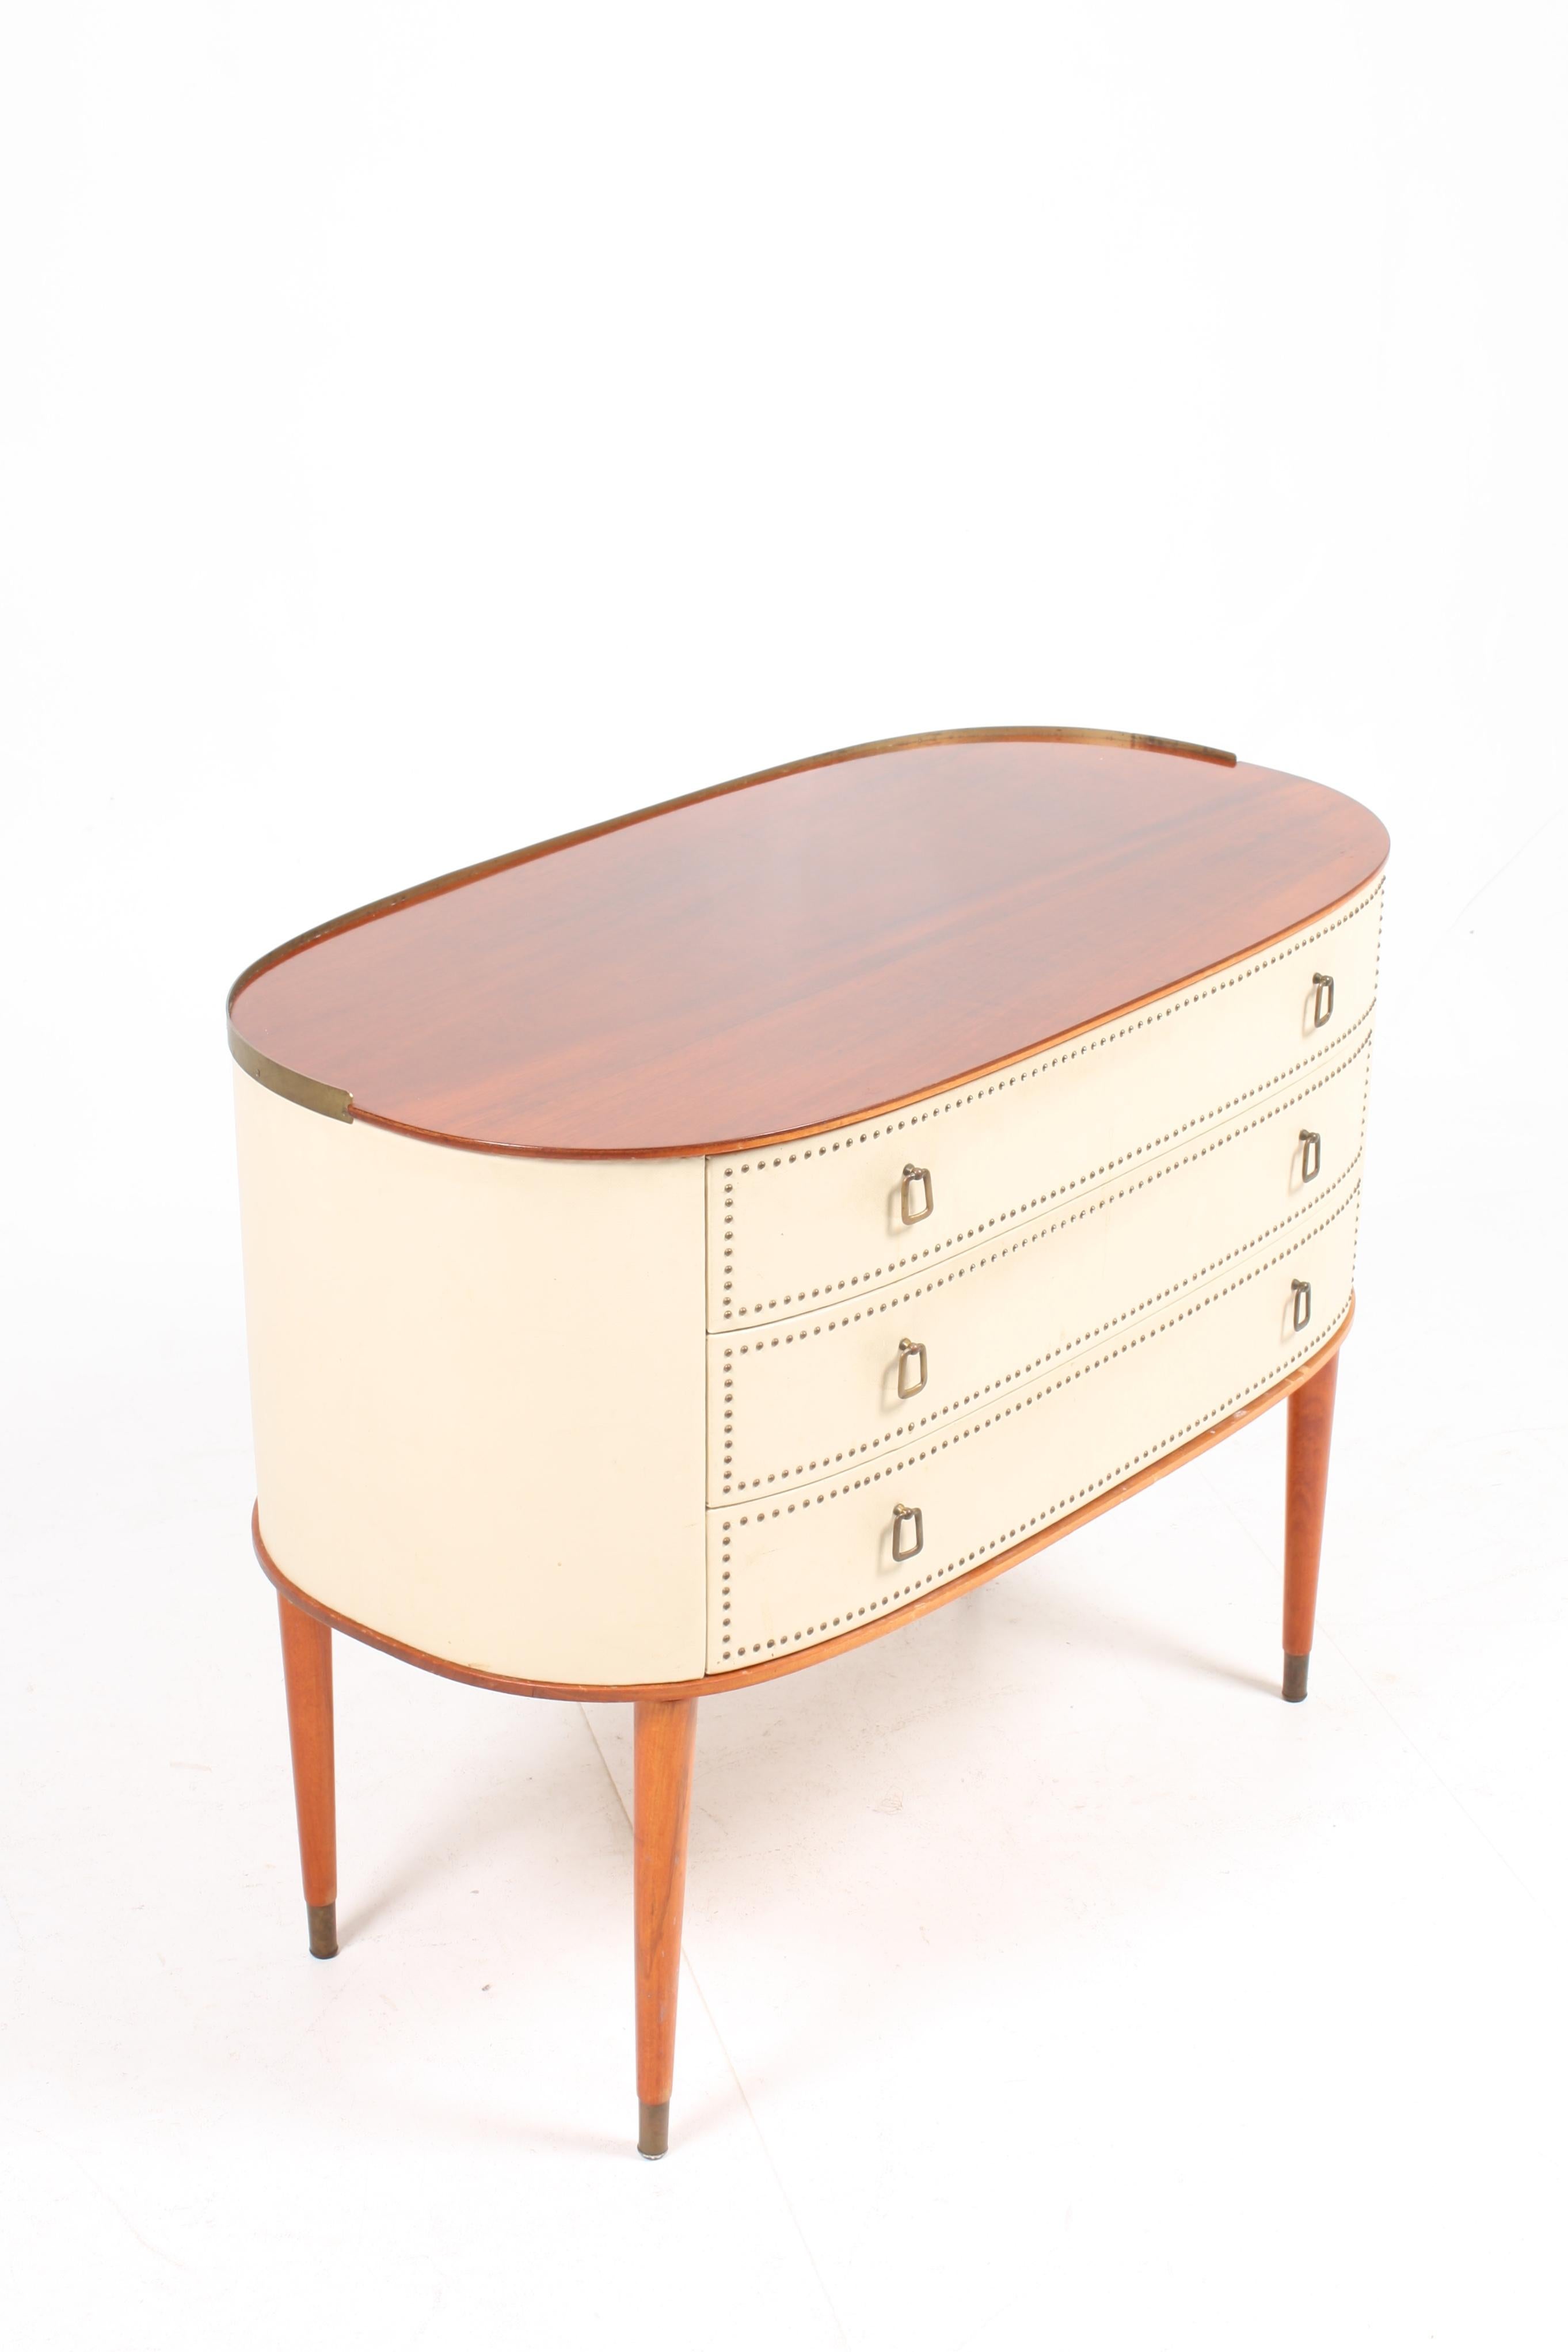 Oval commode in mahogany and vinyl with hardware in brass. Designed by Halvdan Petterson for Tibro Møbelfabrik in the 1940s. Great original condition.